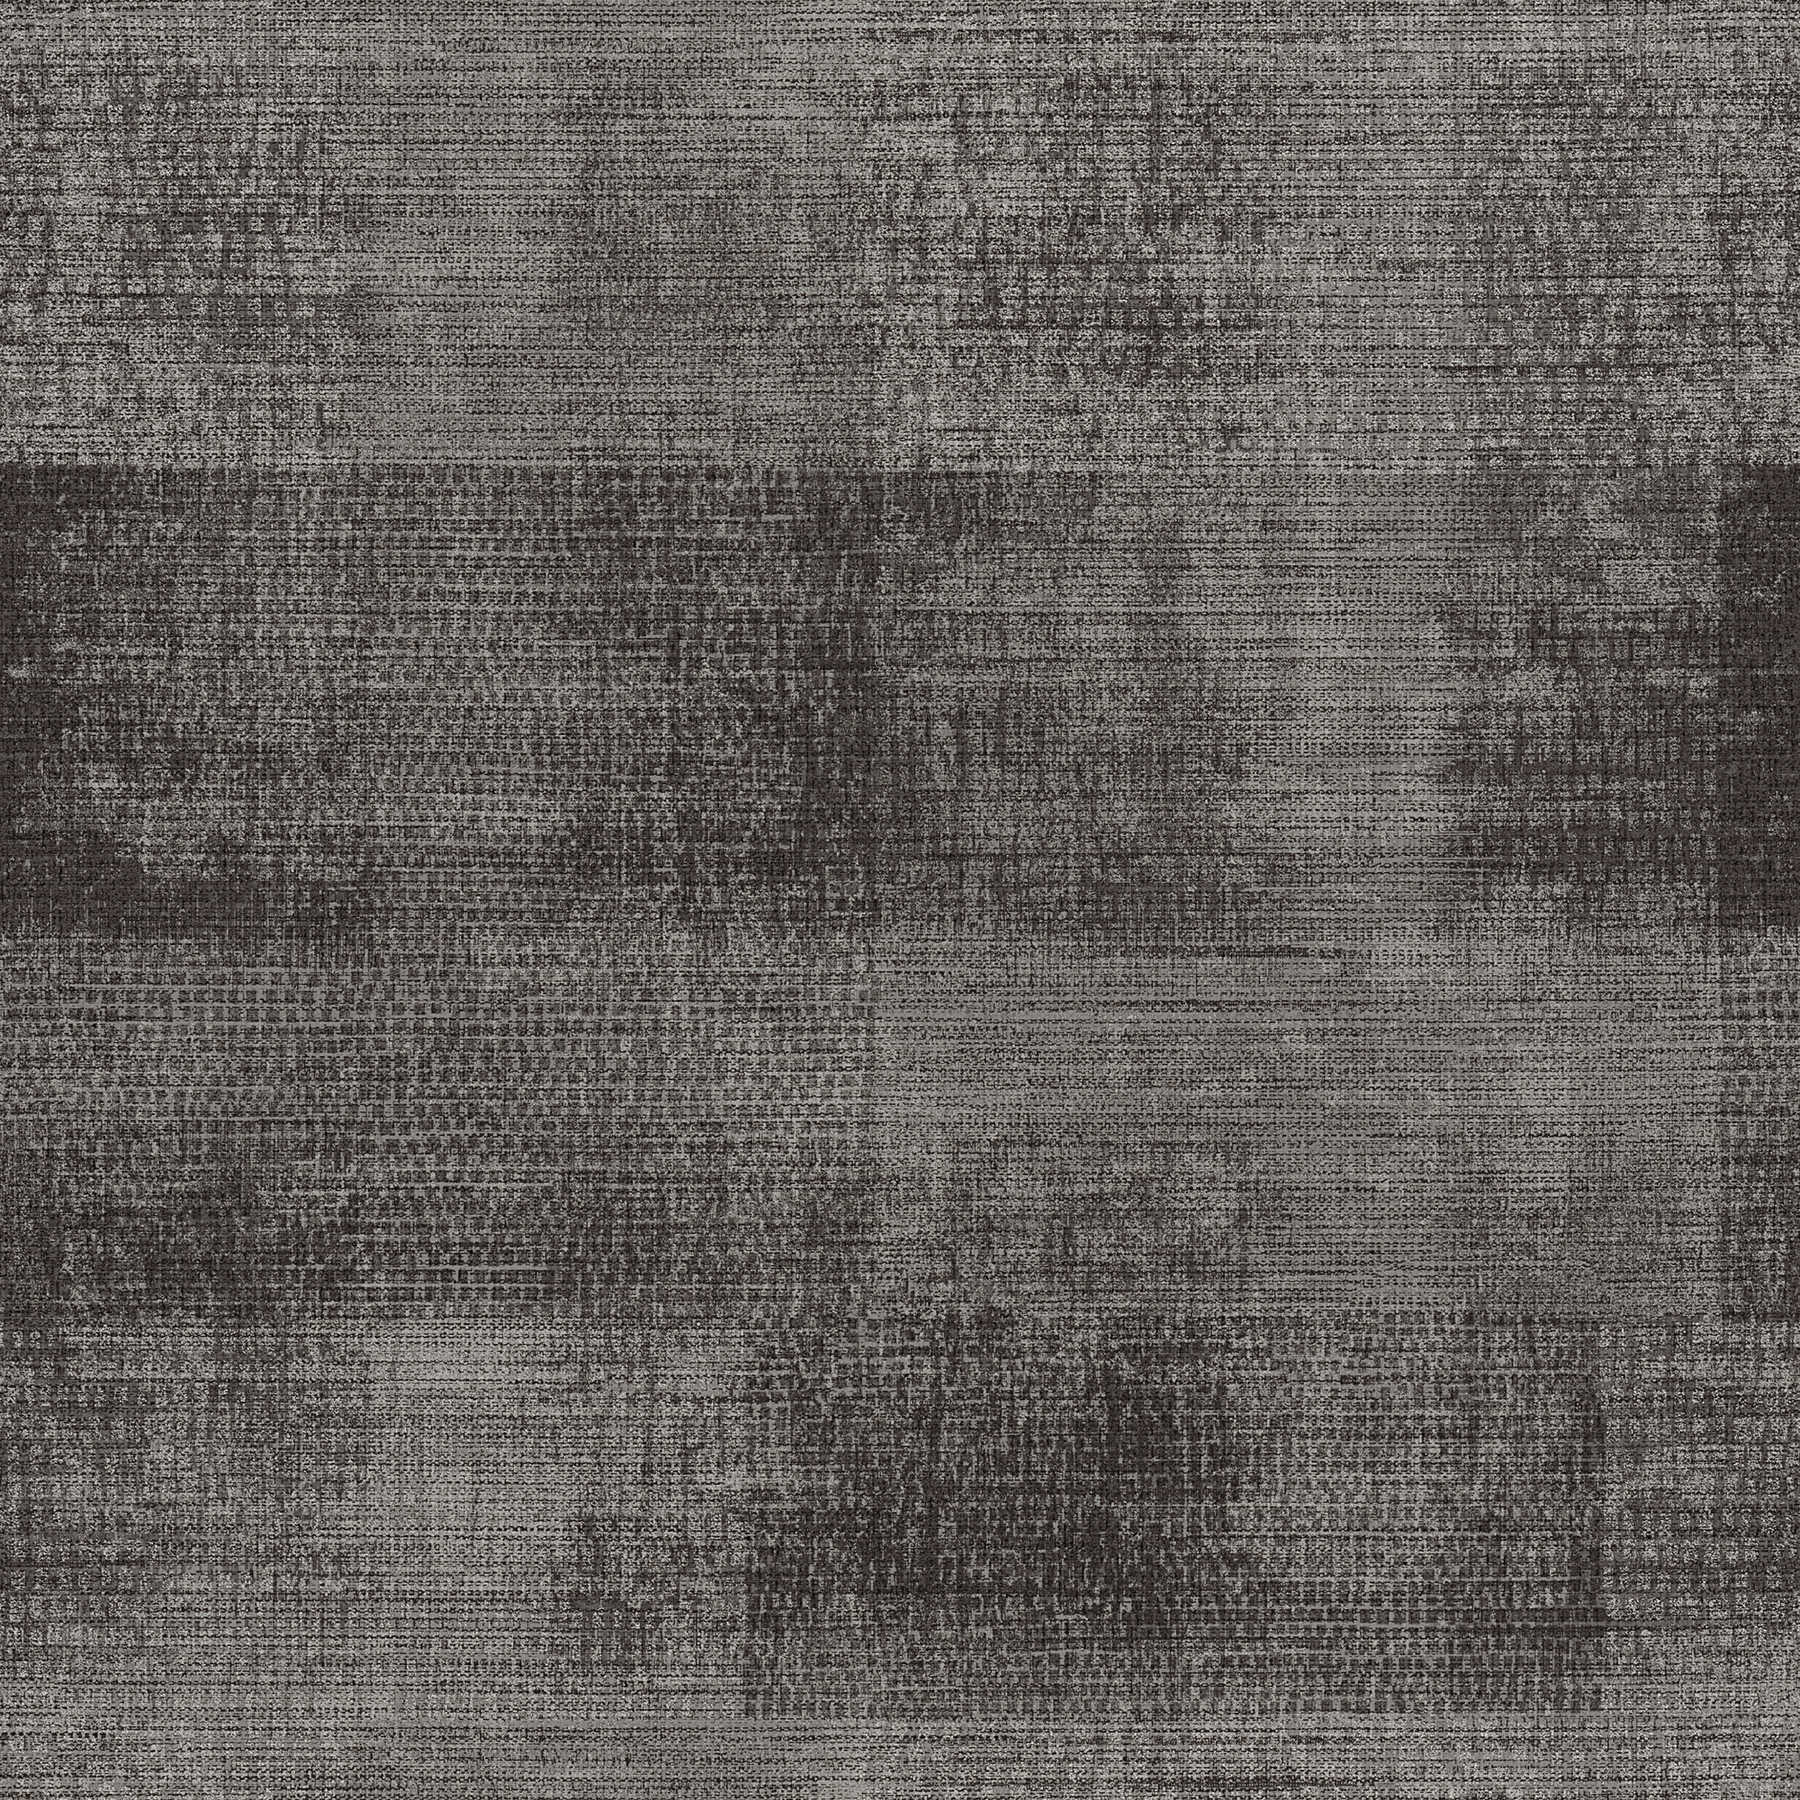         Non-woven wallpaper texture pattern in ethnic style - grey, black
    